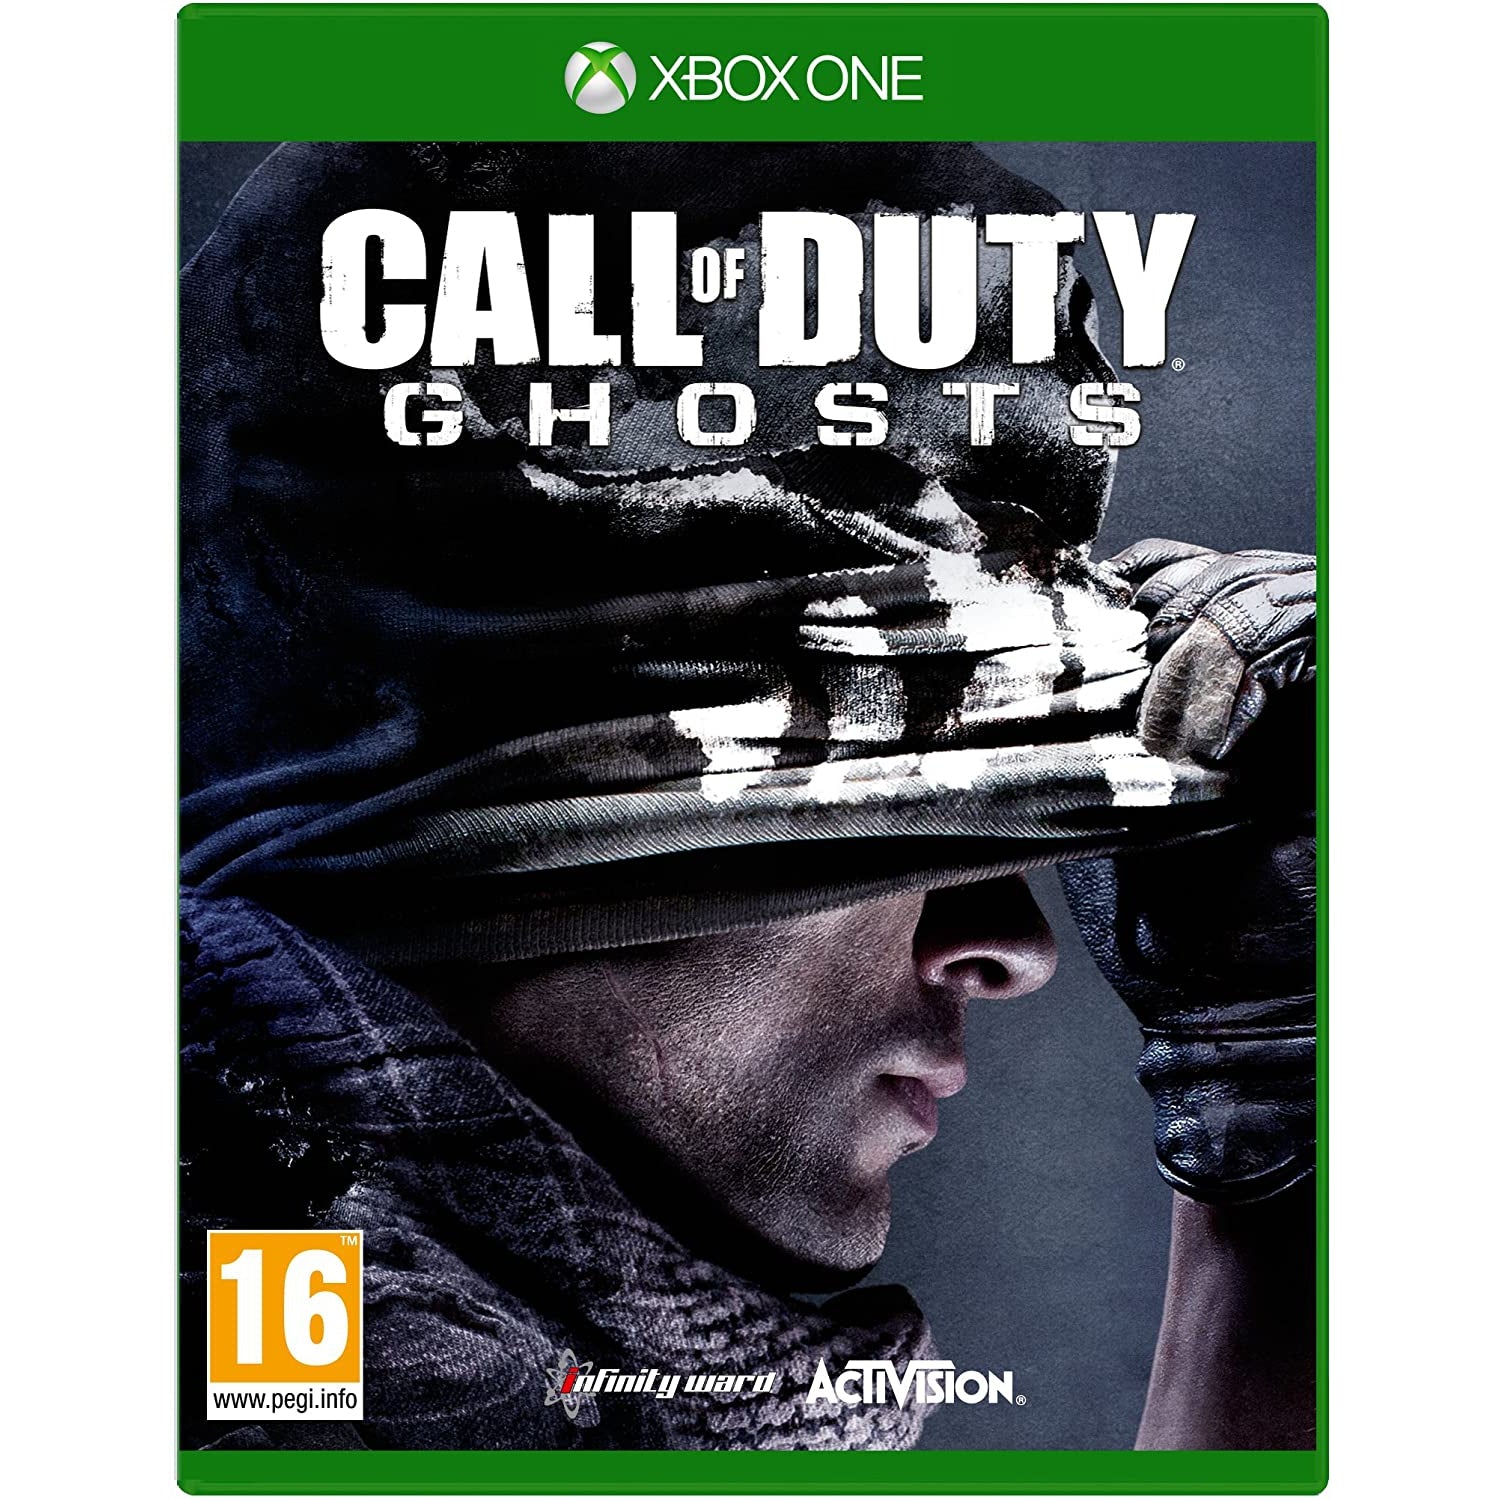 Call of Duty Ghosts (Xbox One)